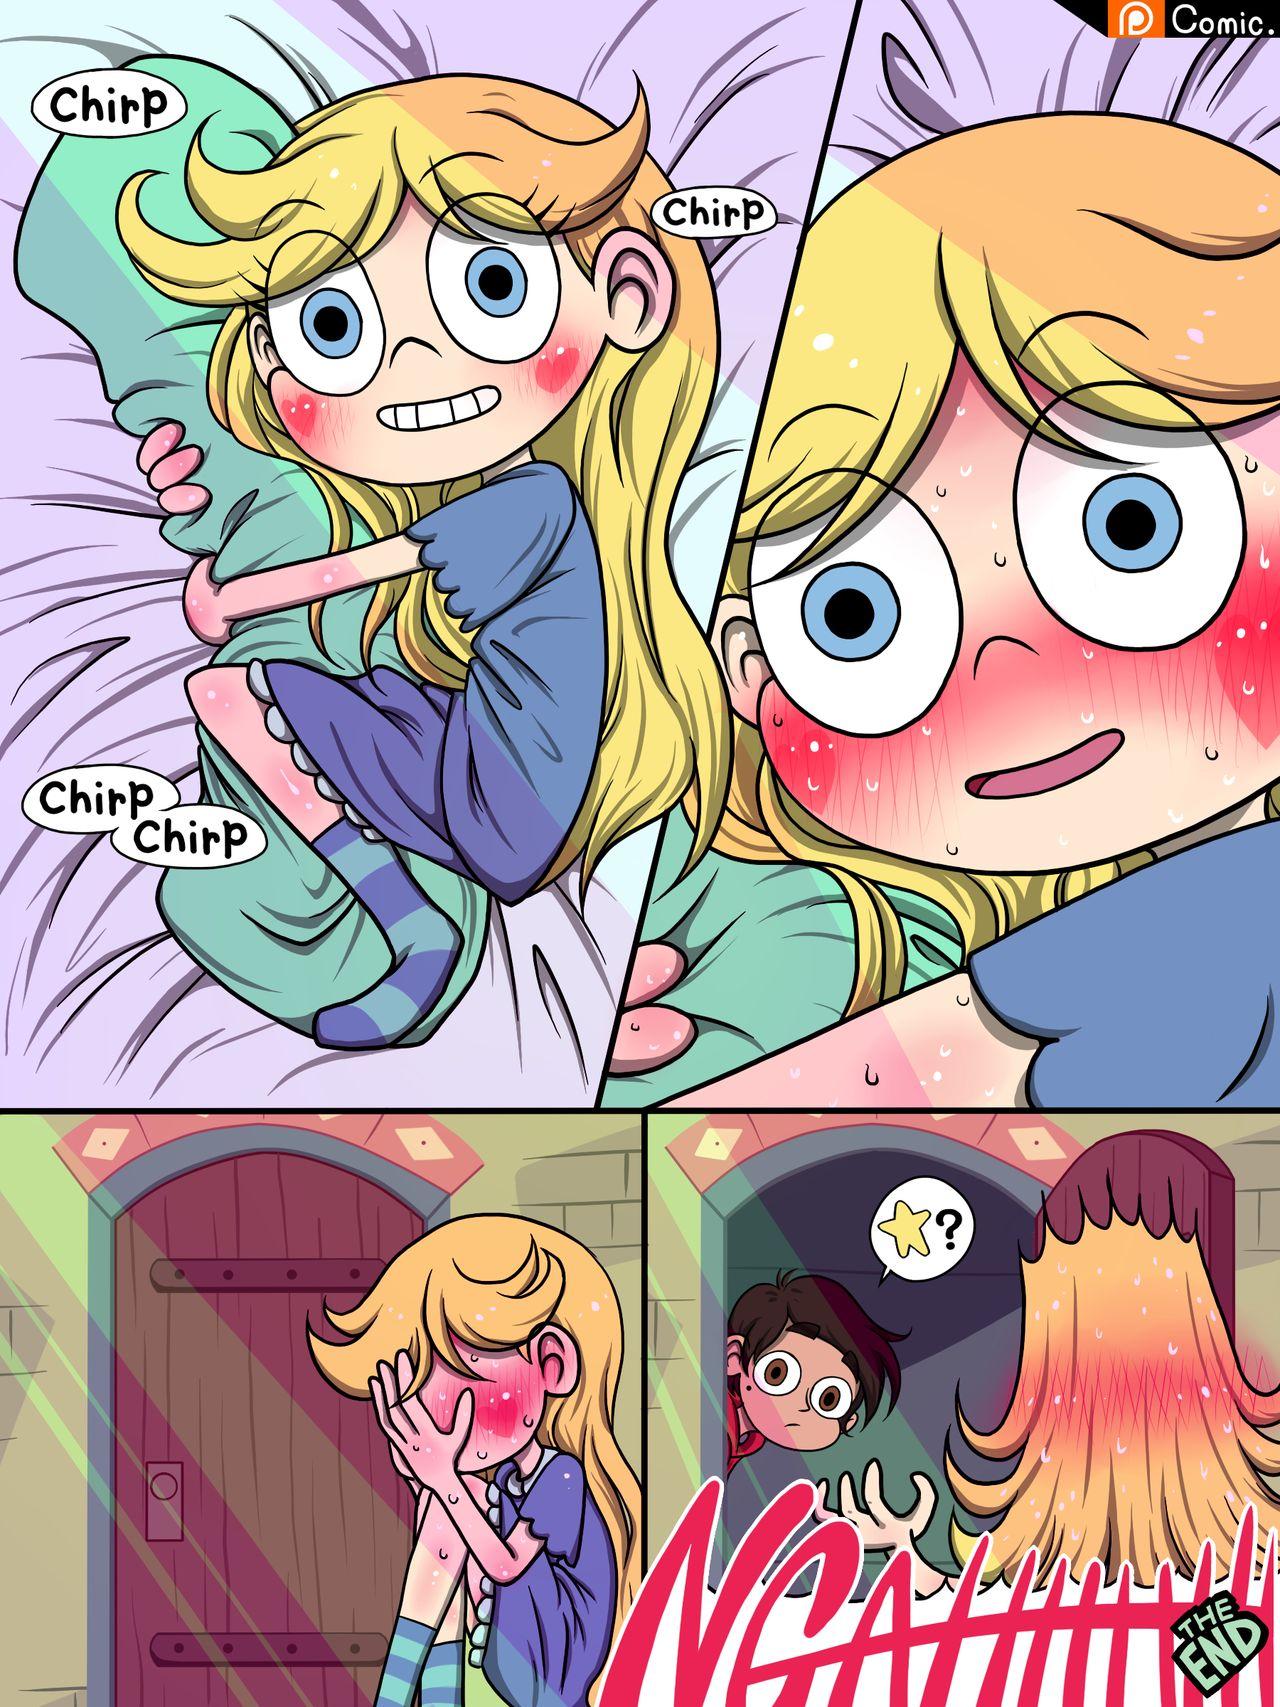 Comedor Foces of Dream - Star vs. the forces of evil Mojada - Page 8